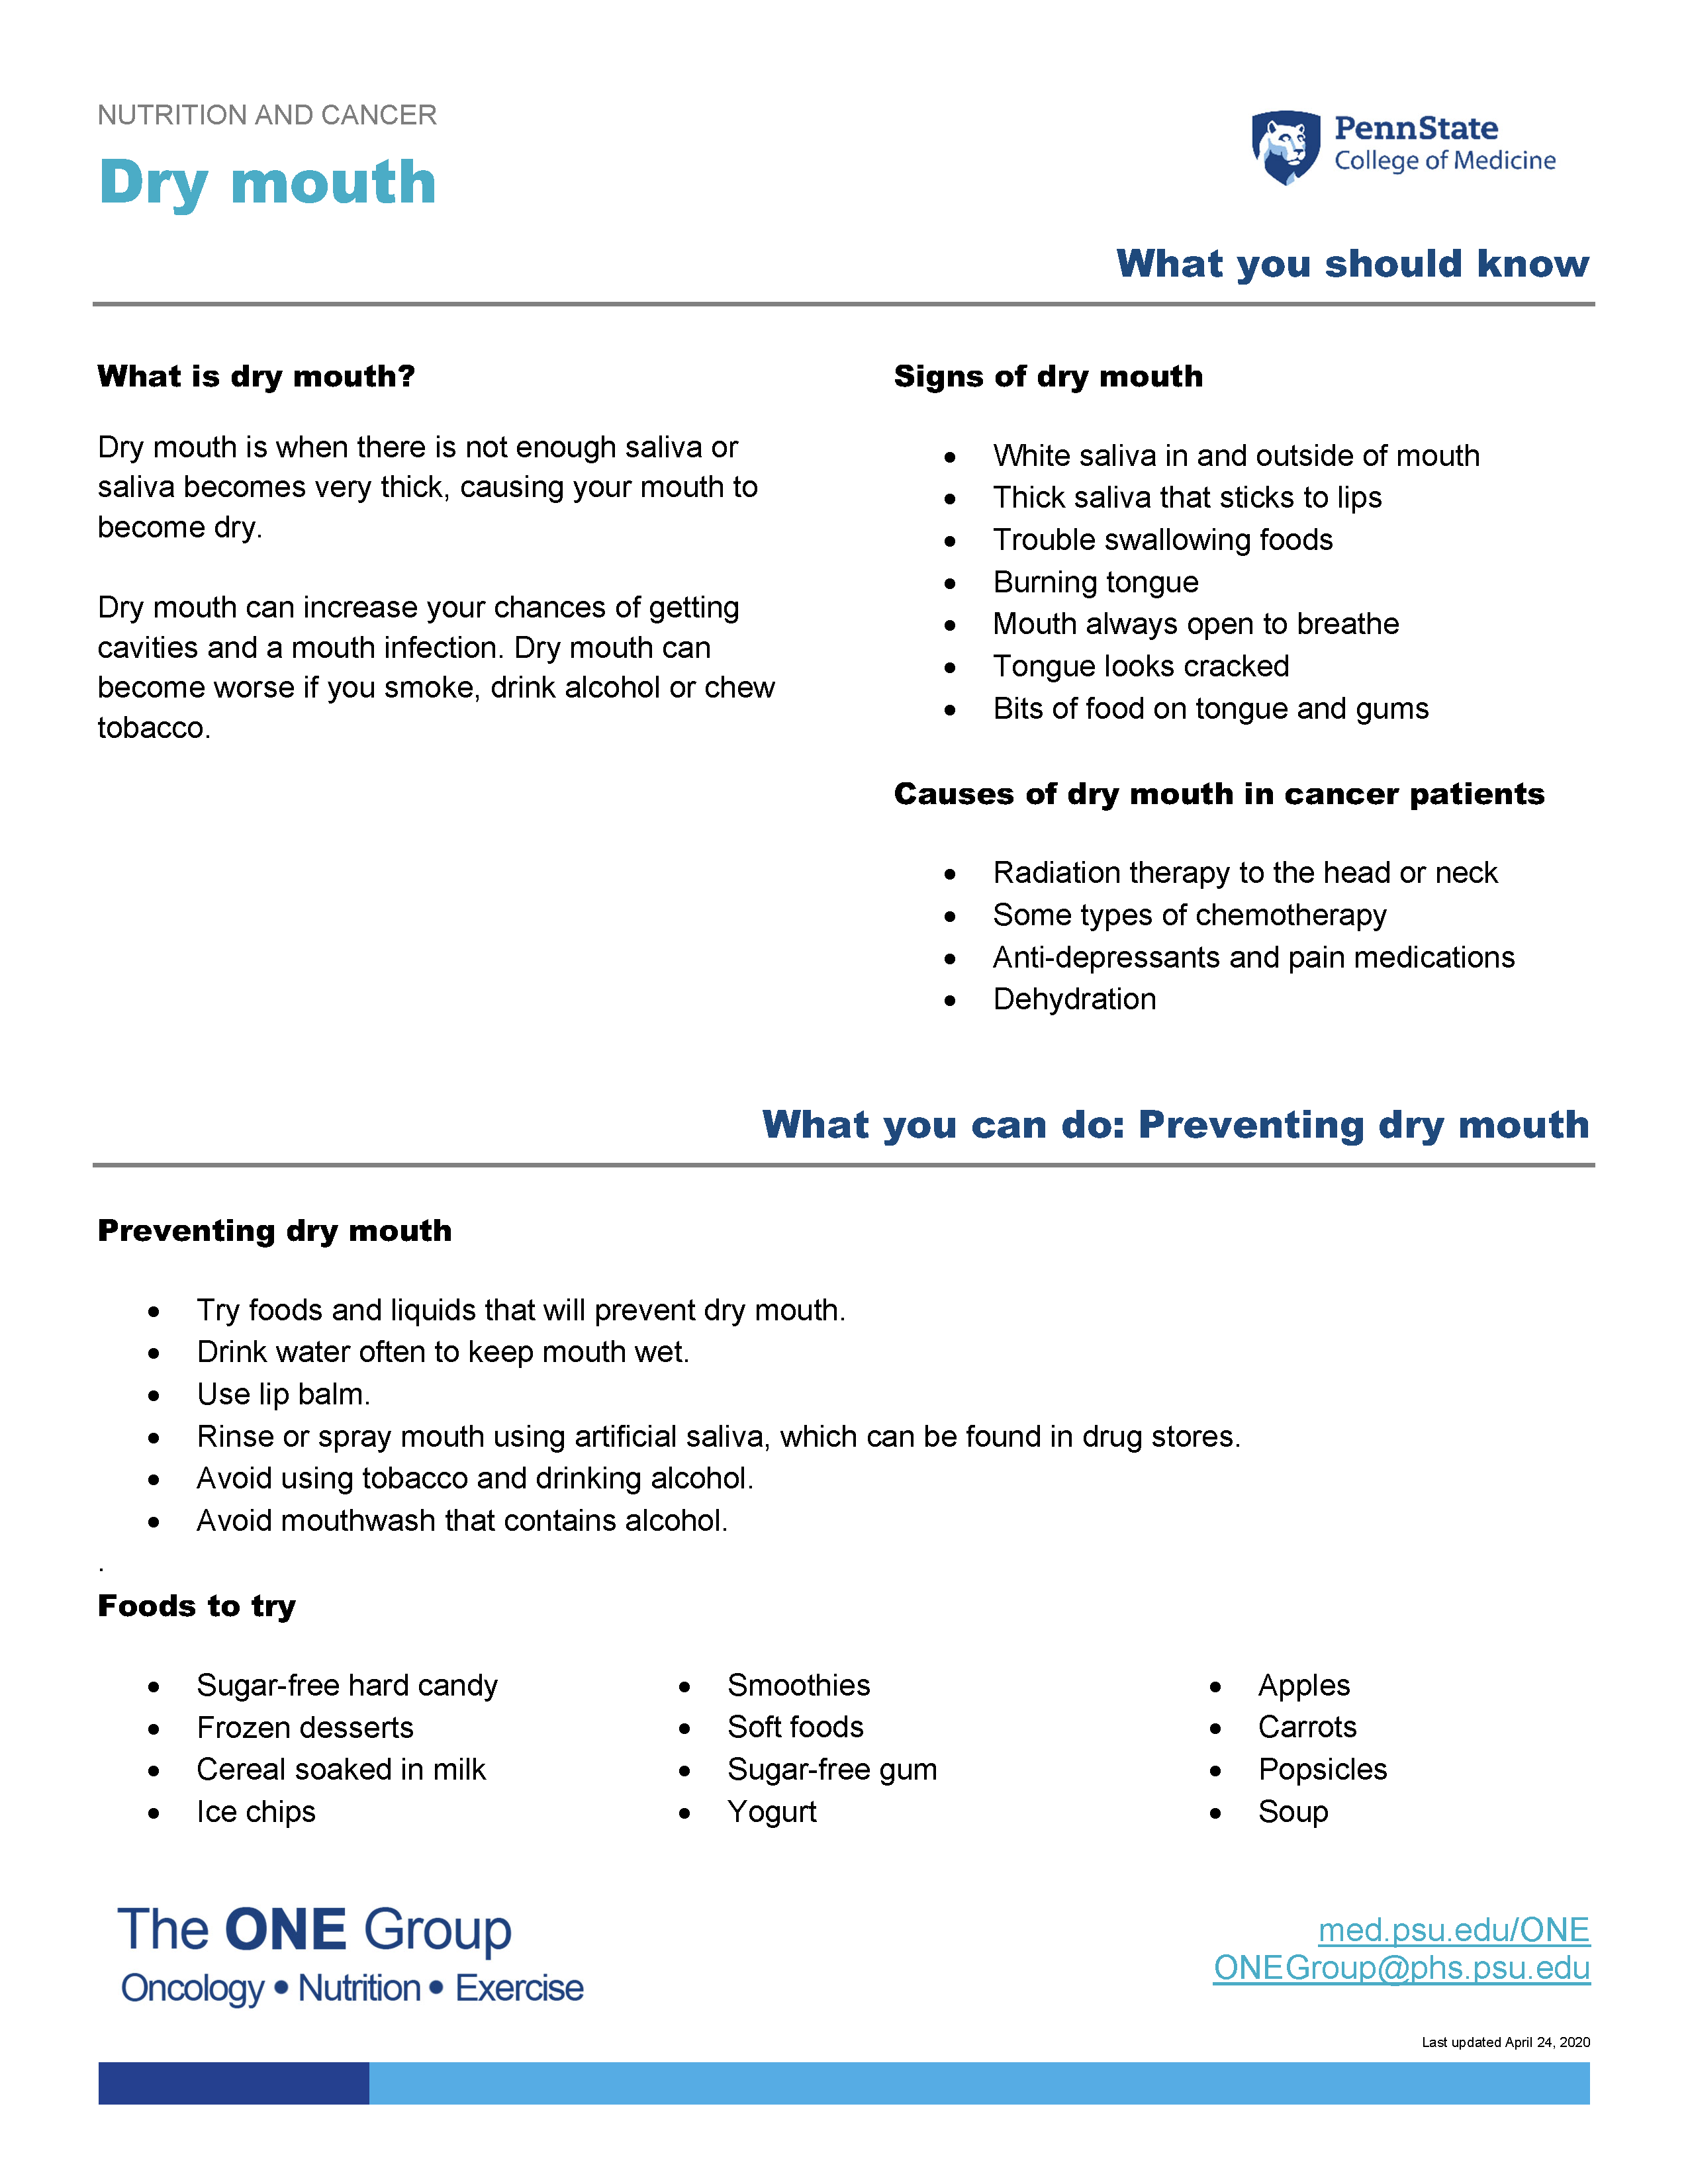 The dry mouth guide from The ONE Group includes the information on this page, formatted for print.